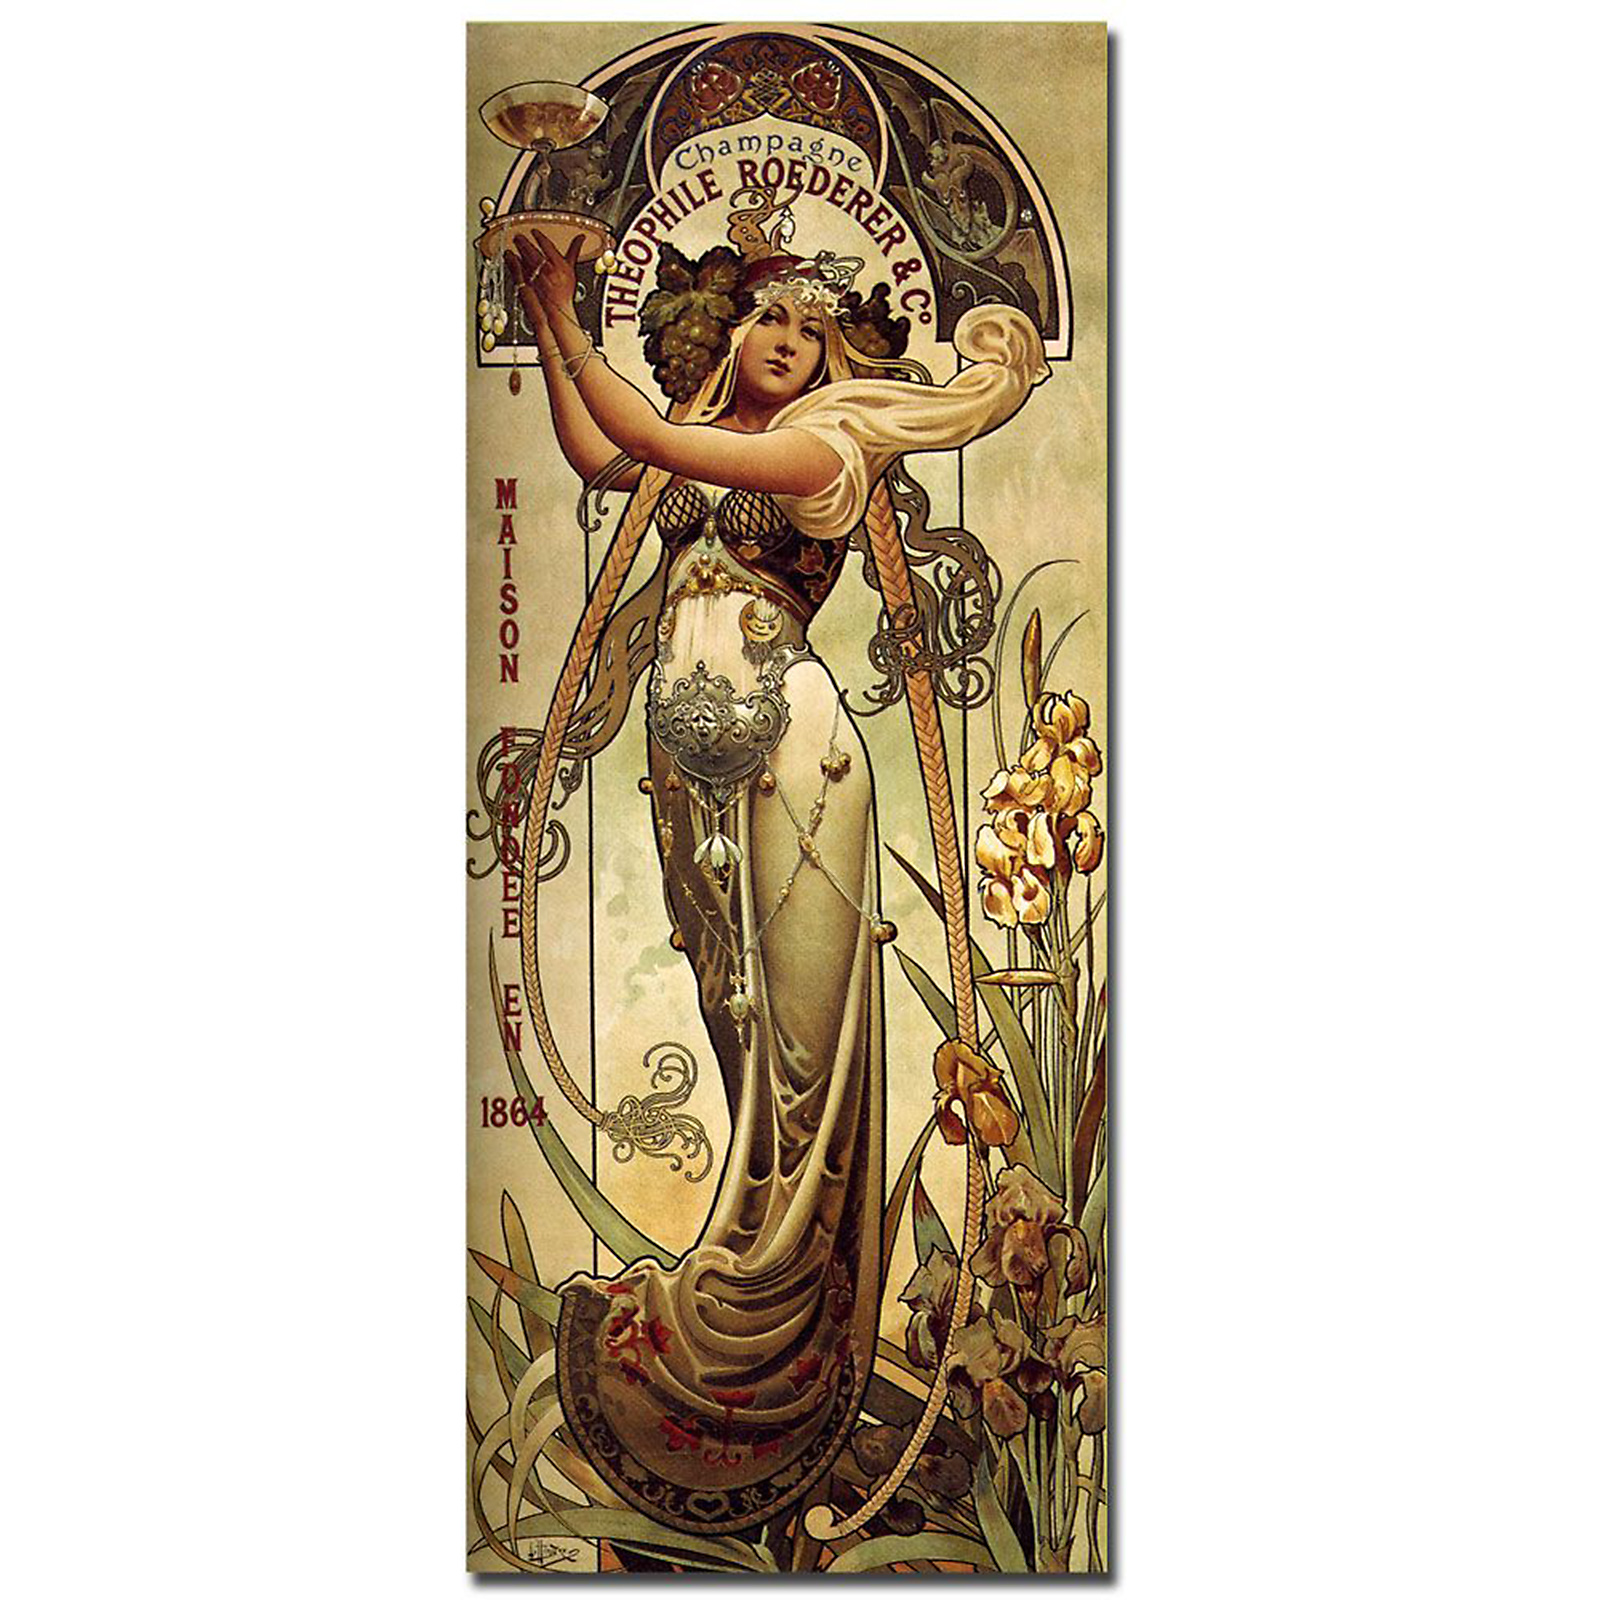 Trademark Global 14x32 inches "Champagne Theophile Roeder & Co" by Louis-Theophile Hingre